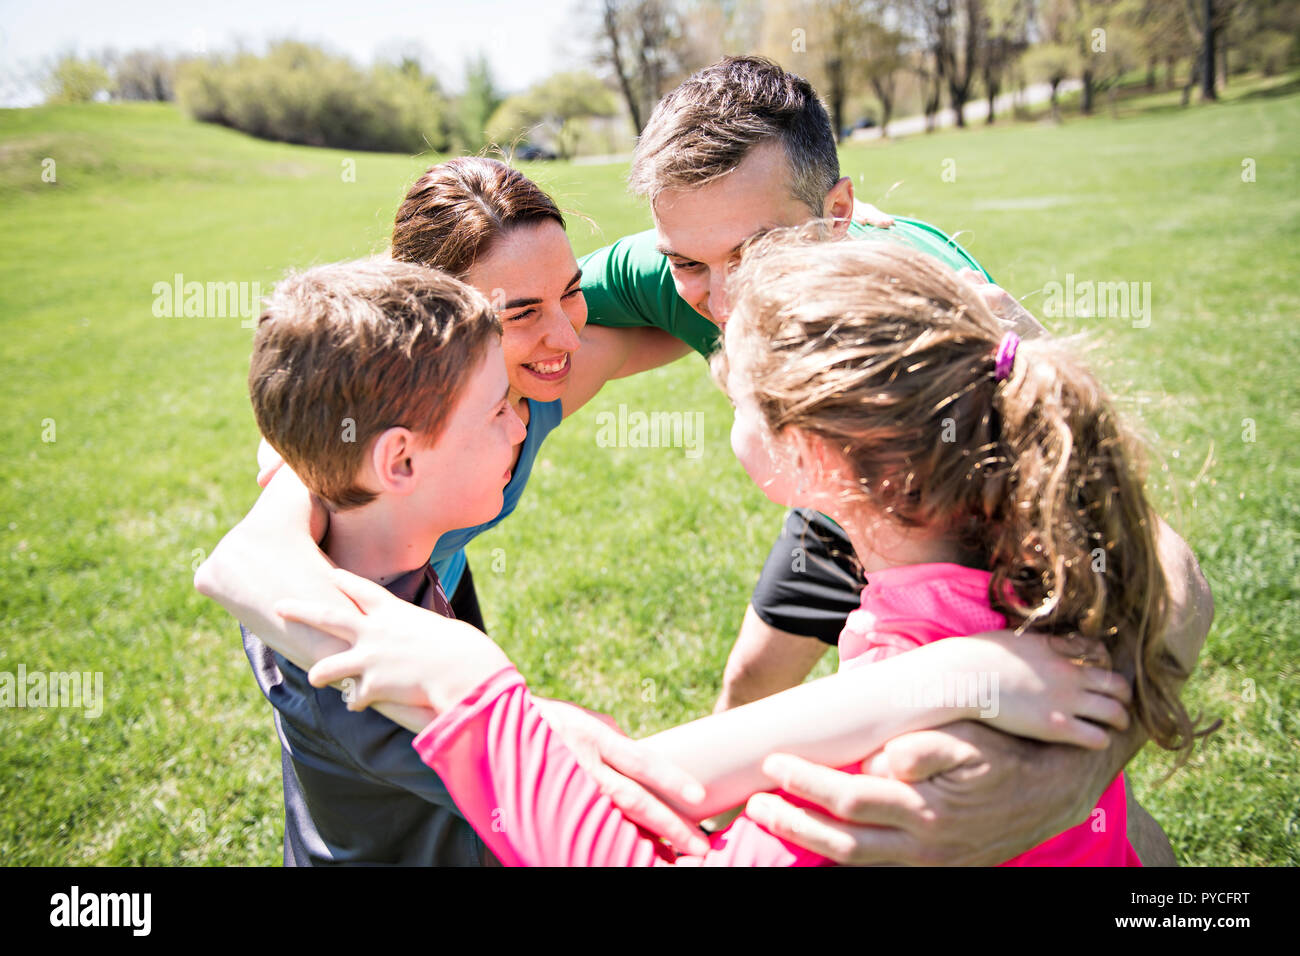 Parents with children sport running together outside Stock Photo - Alamy